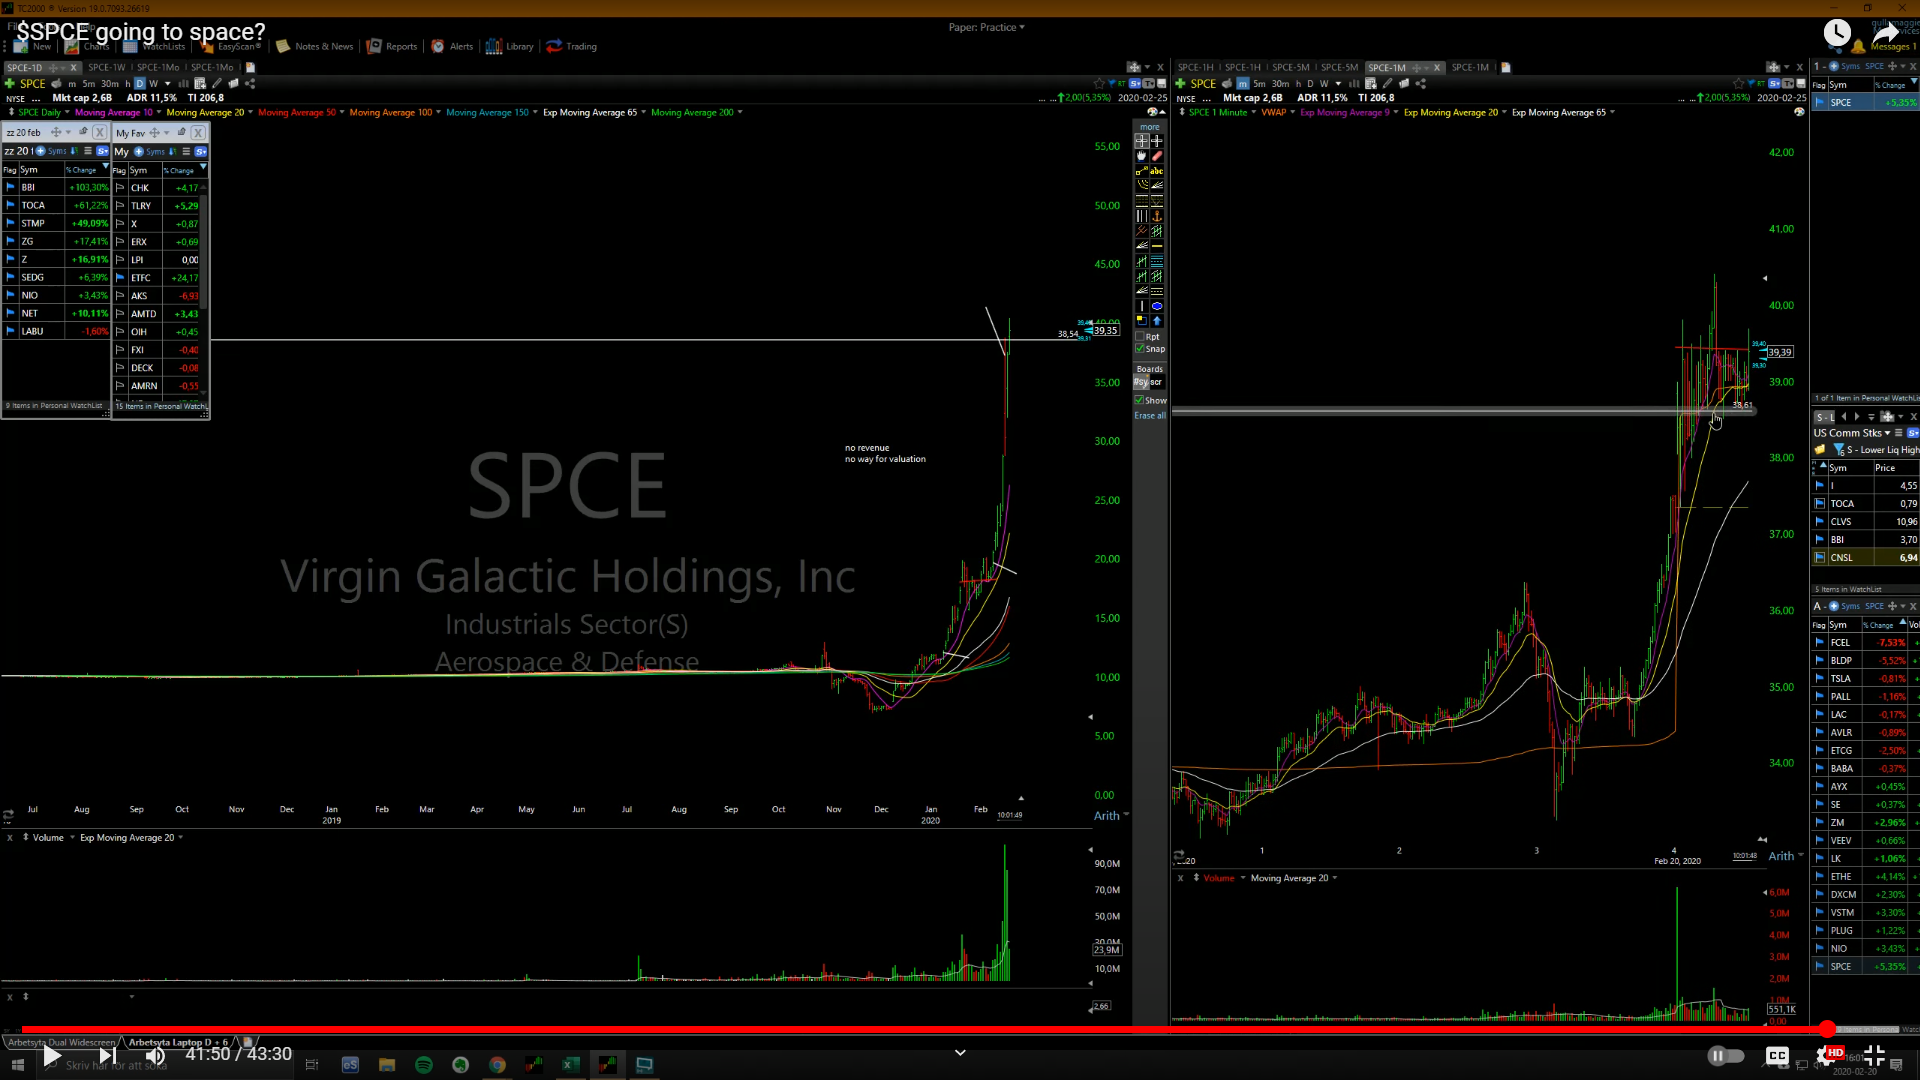 70 [$SPCE going to space? Feb 20, 2020]